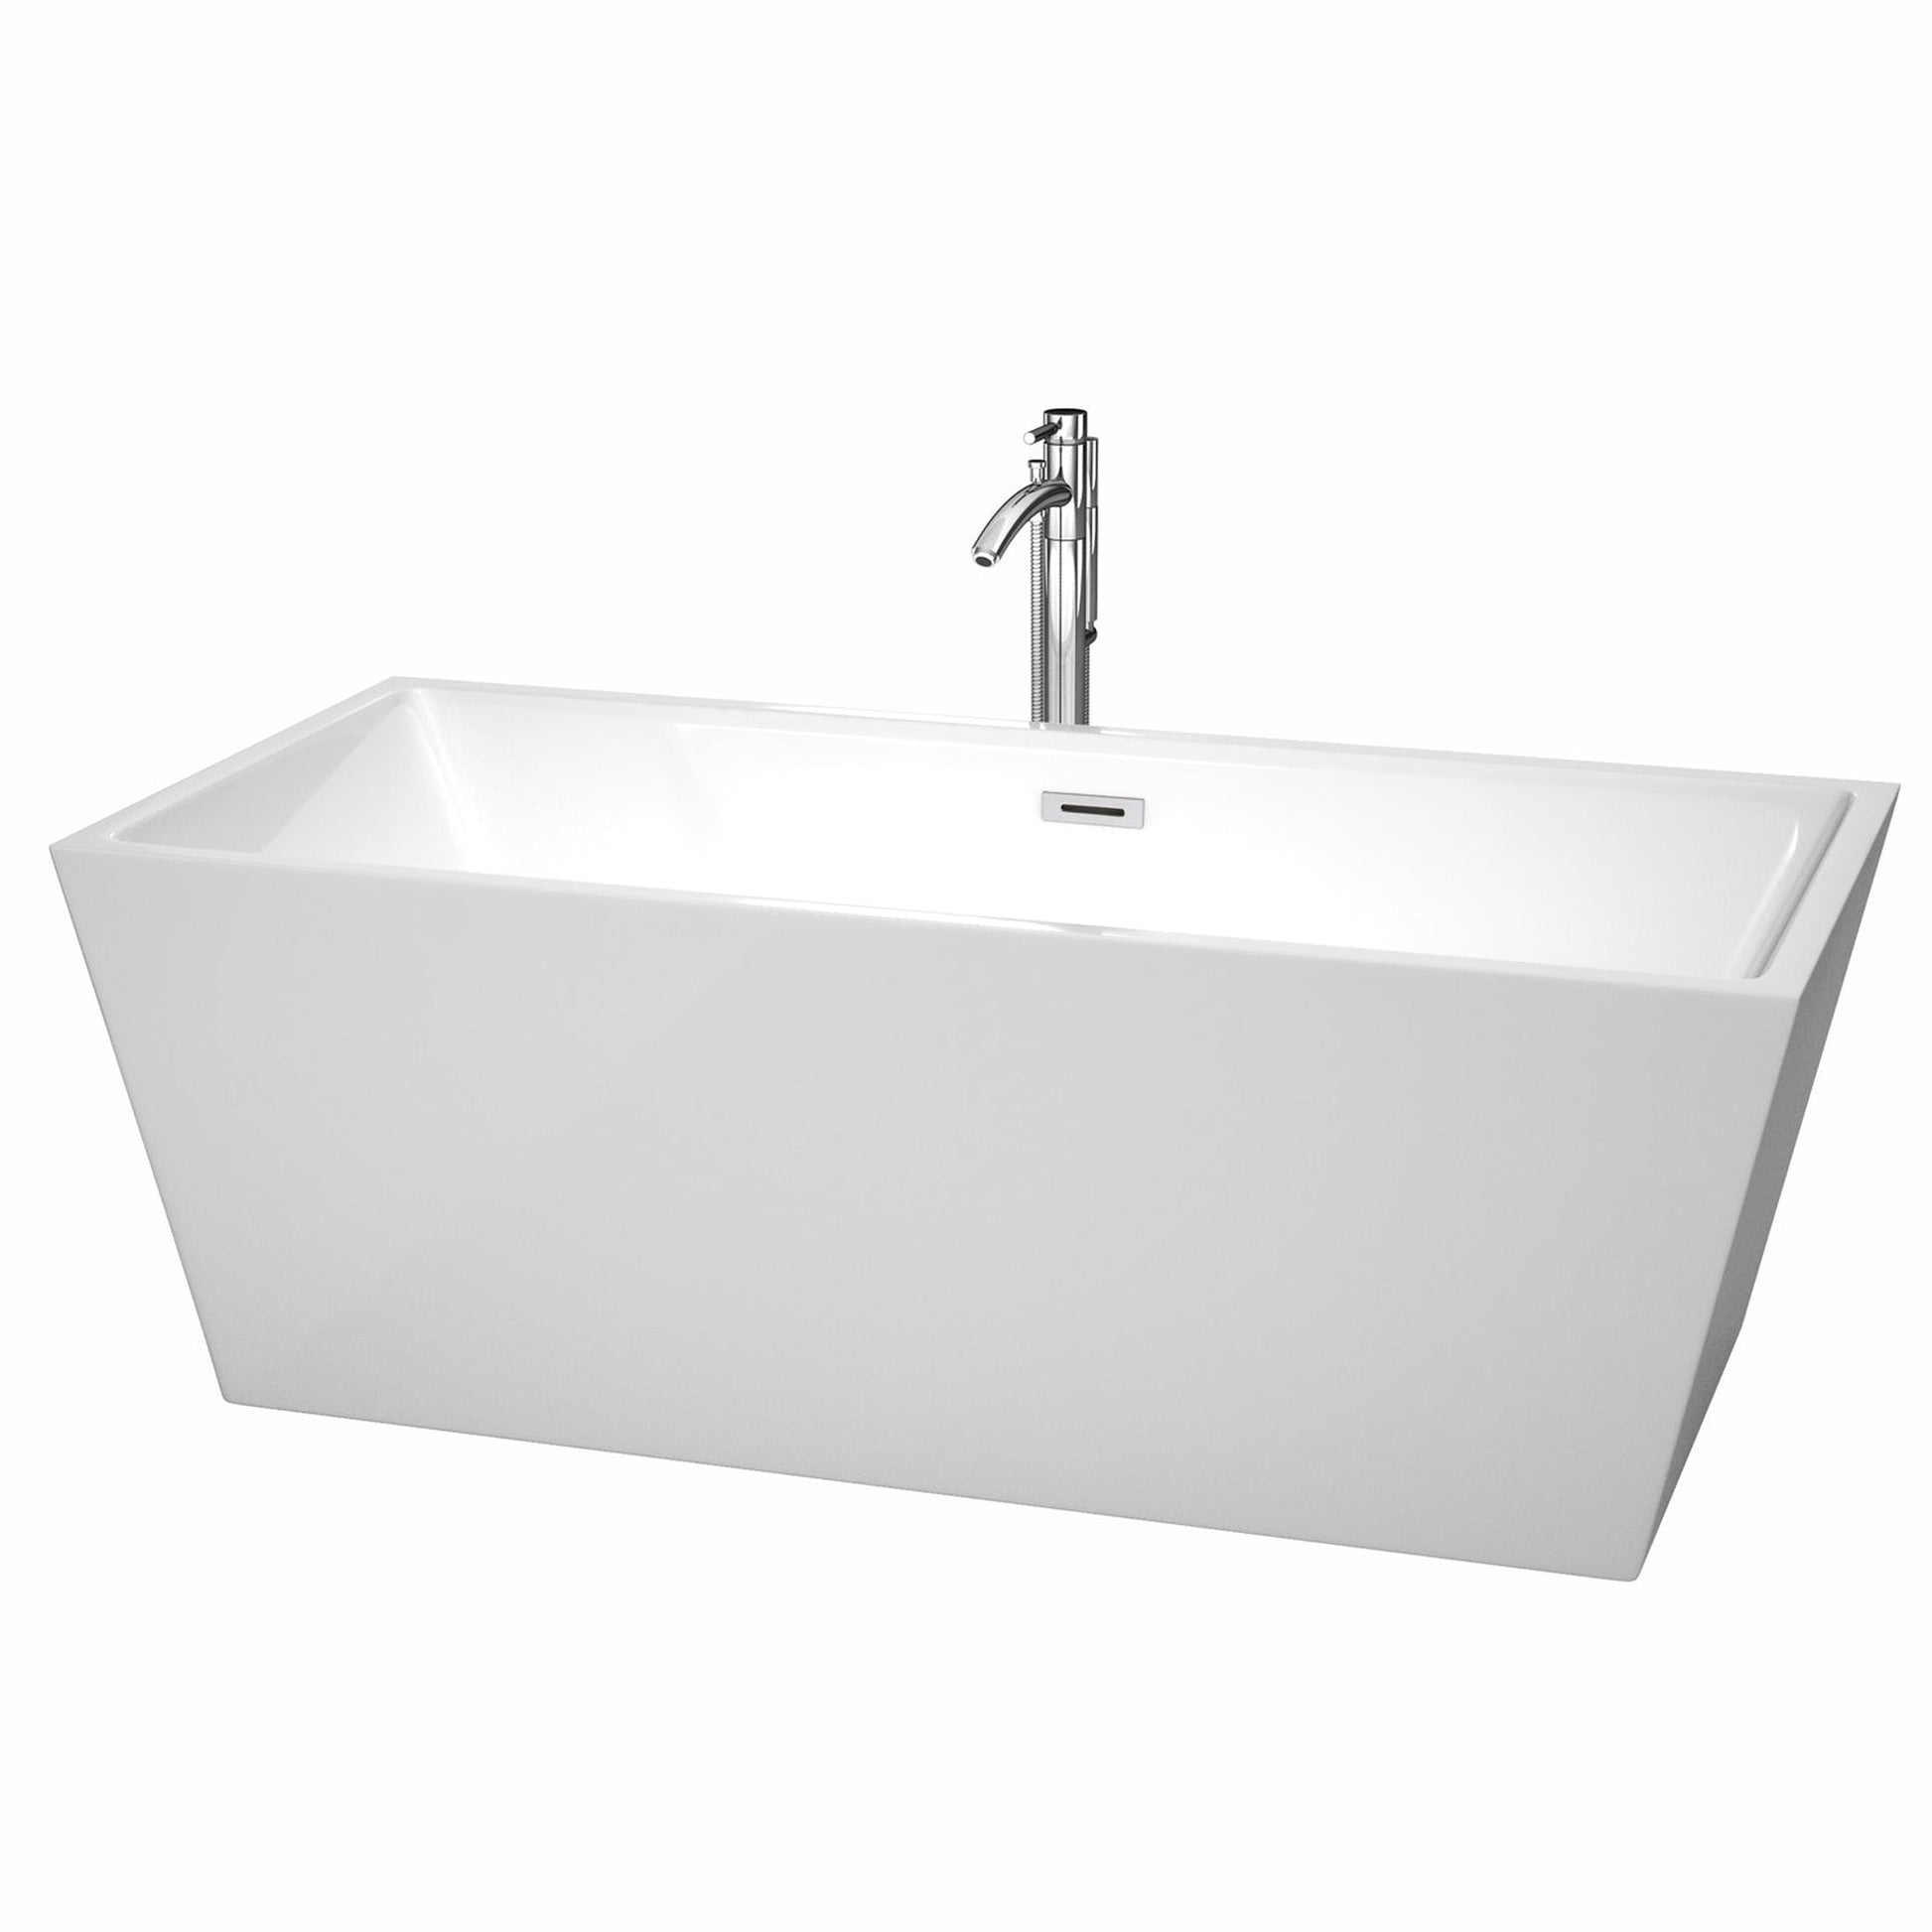 Wyndham Collection Sara 67" Freestanding Bathtub in White With Floor Mounted Faucet, Drain and Overflow Trim in Polished Chrome